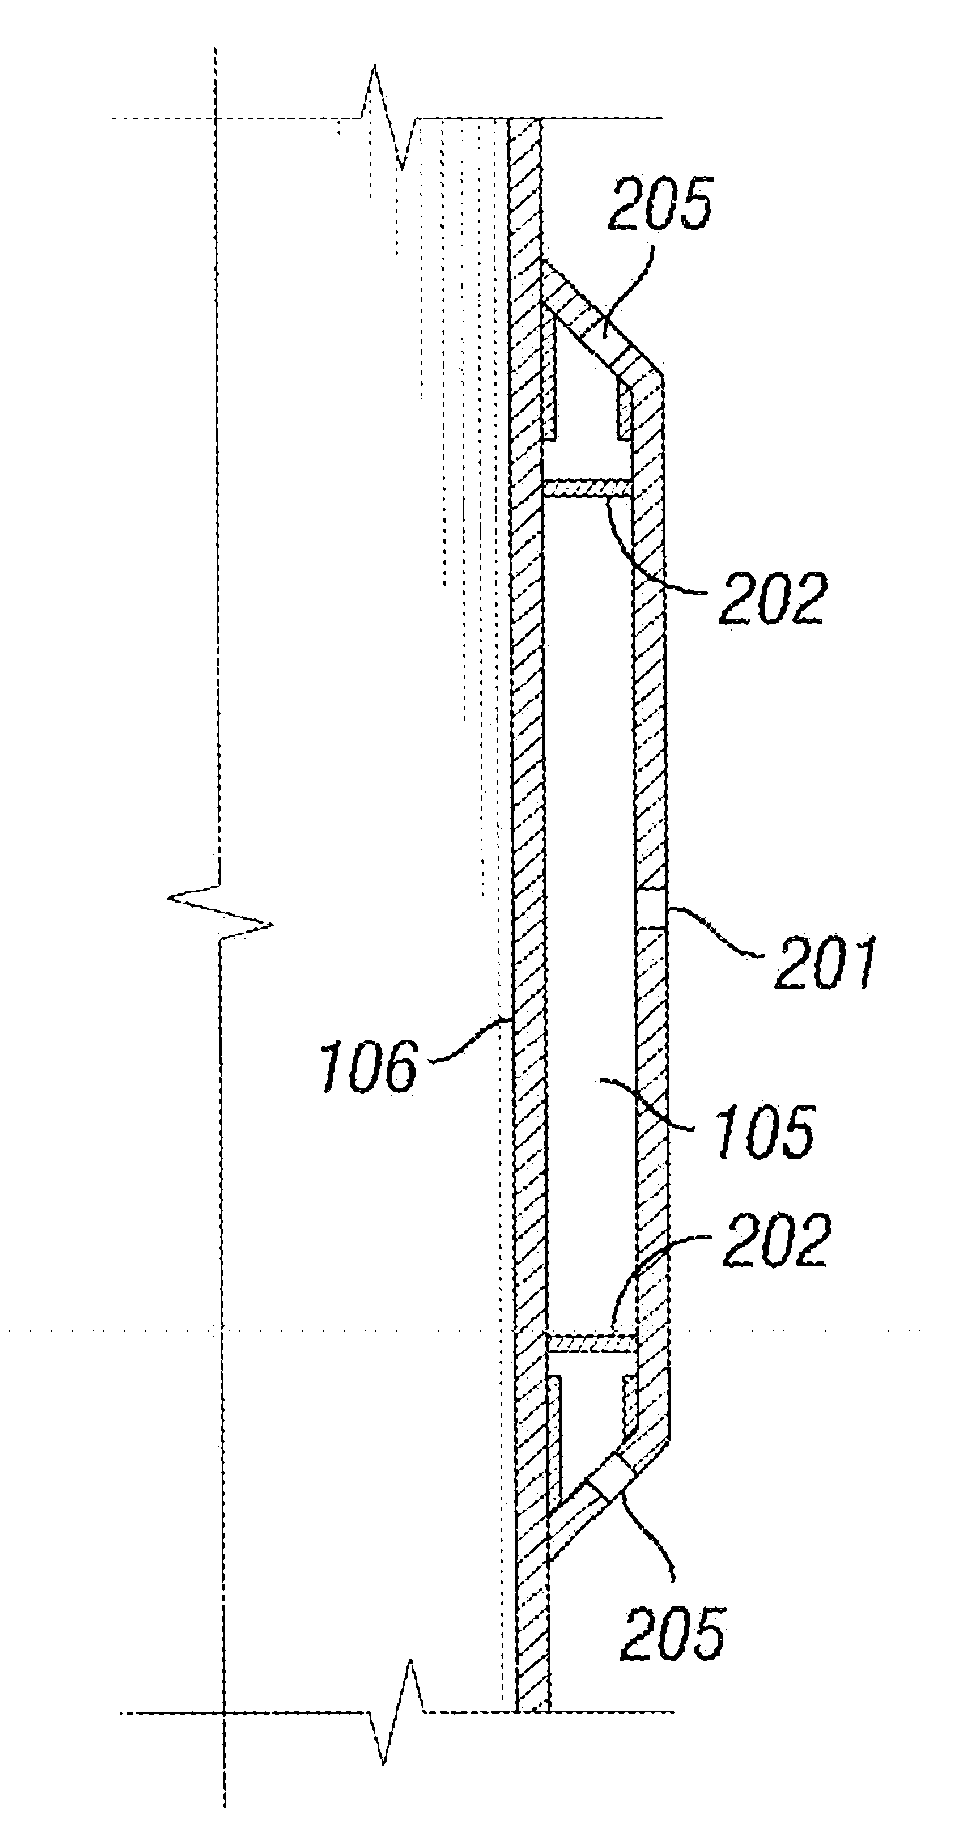 Systems and methods for mitigating annular pressure buildup in an oil or gas well